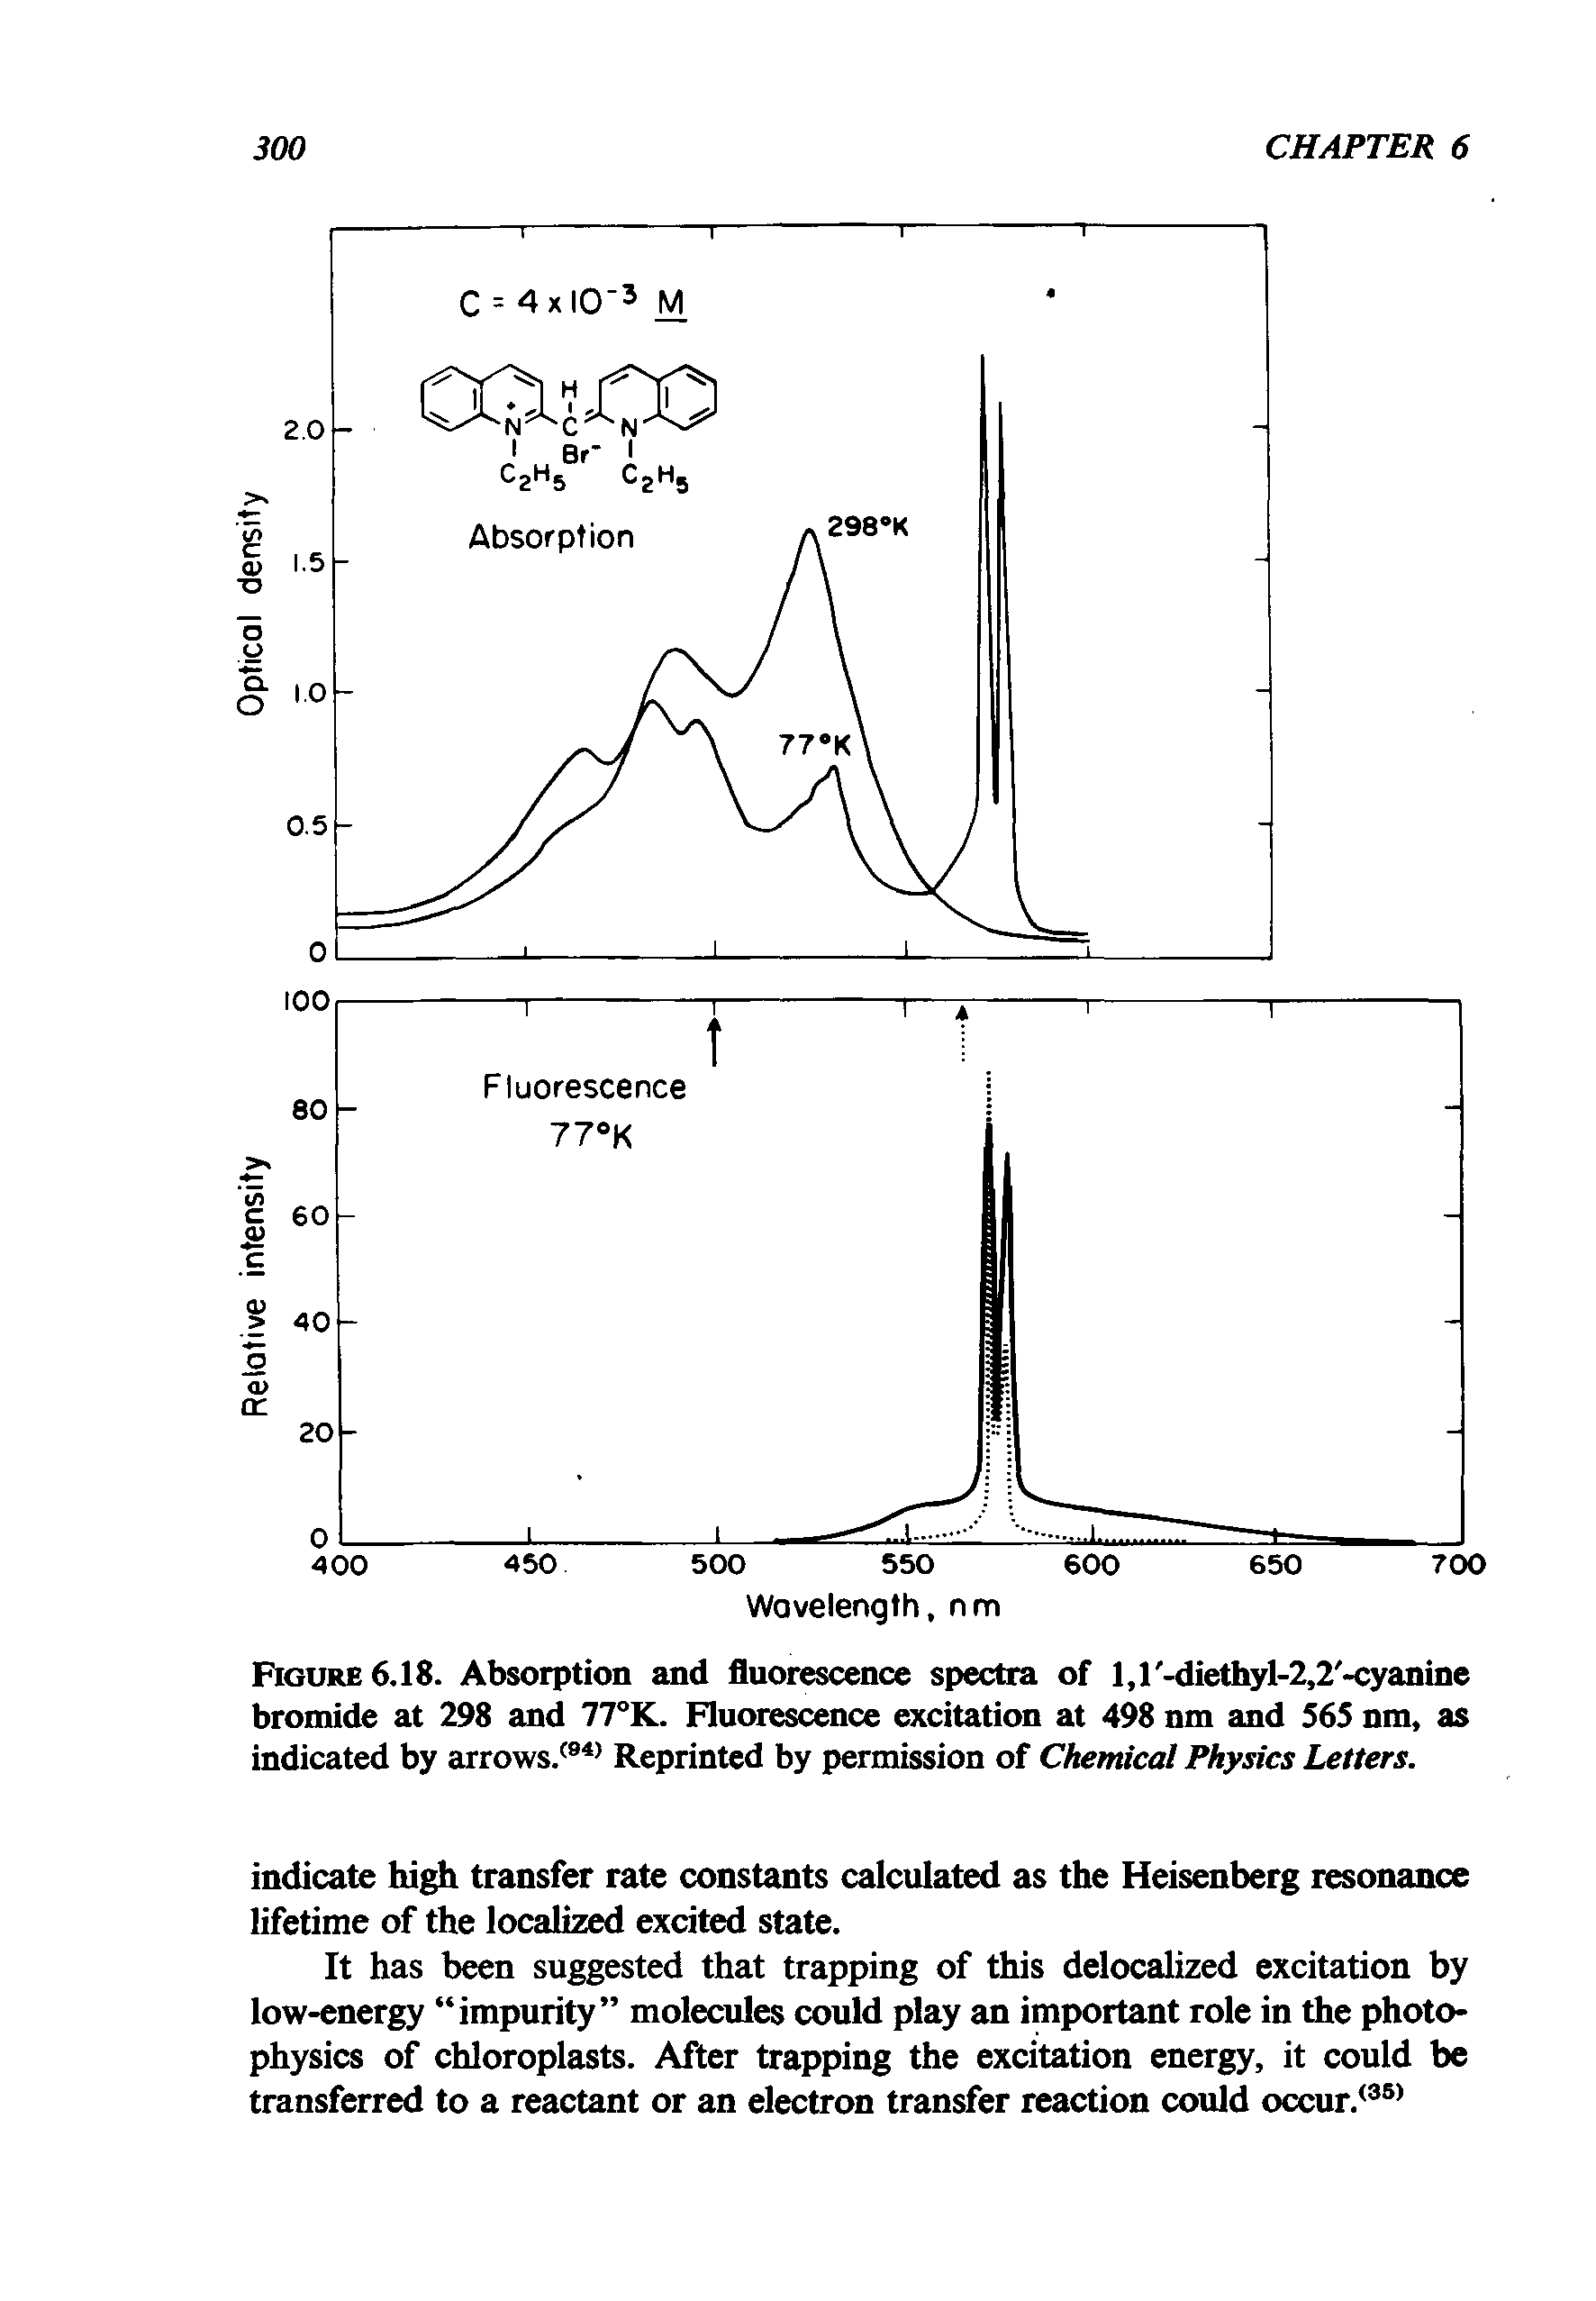 Figure 6.18. Absorption and fluorescence spectra of l,r-diethyl-2,2 -cyanine bromide at 298 and 77°K. Fluorescence excitation at 498 nm and 565 nm, as indicated by arrows/941 Reprinted by permission of Chemical Physics Letters.